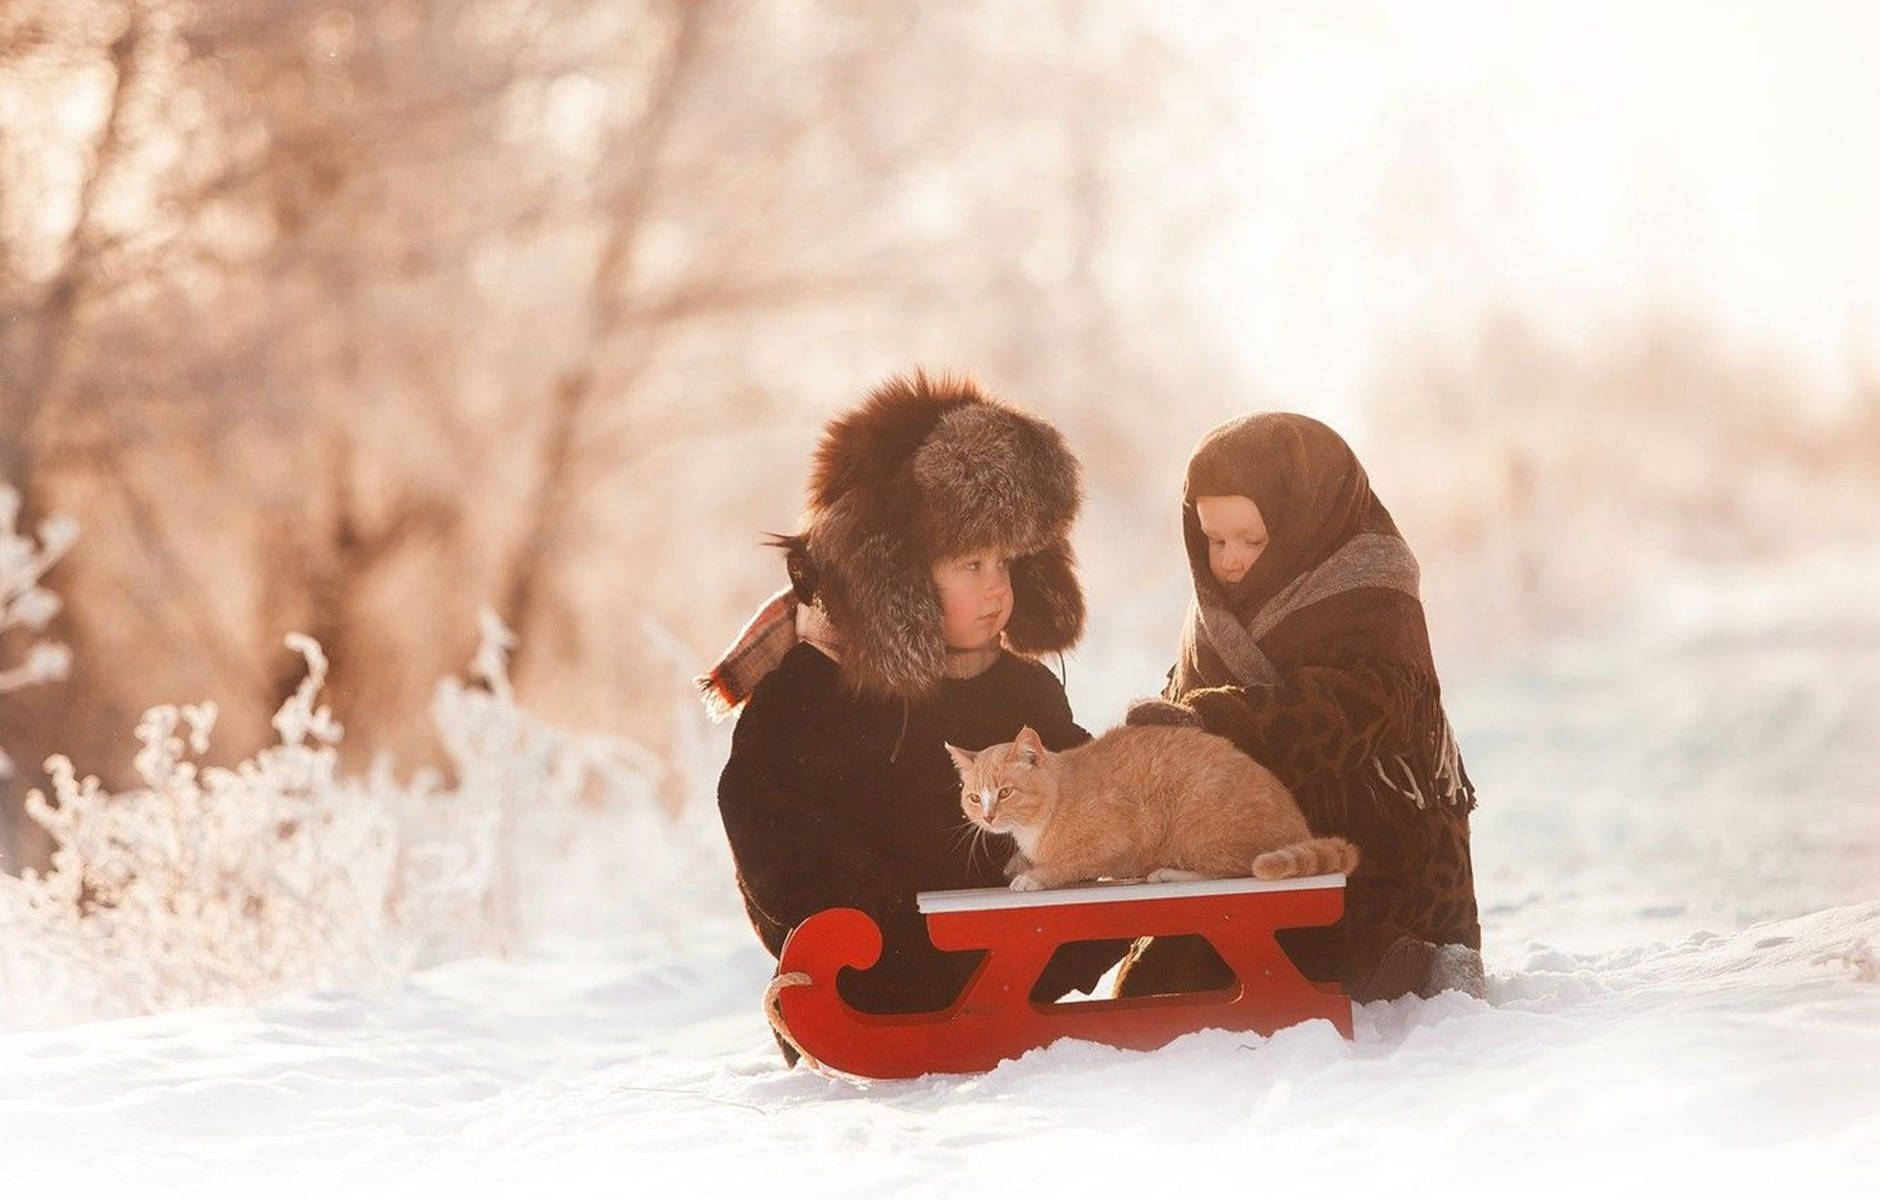 Cute Babies Sledding On The Snow Background